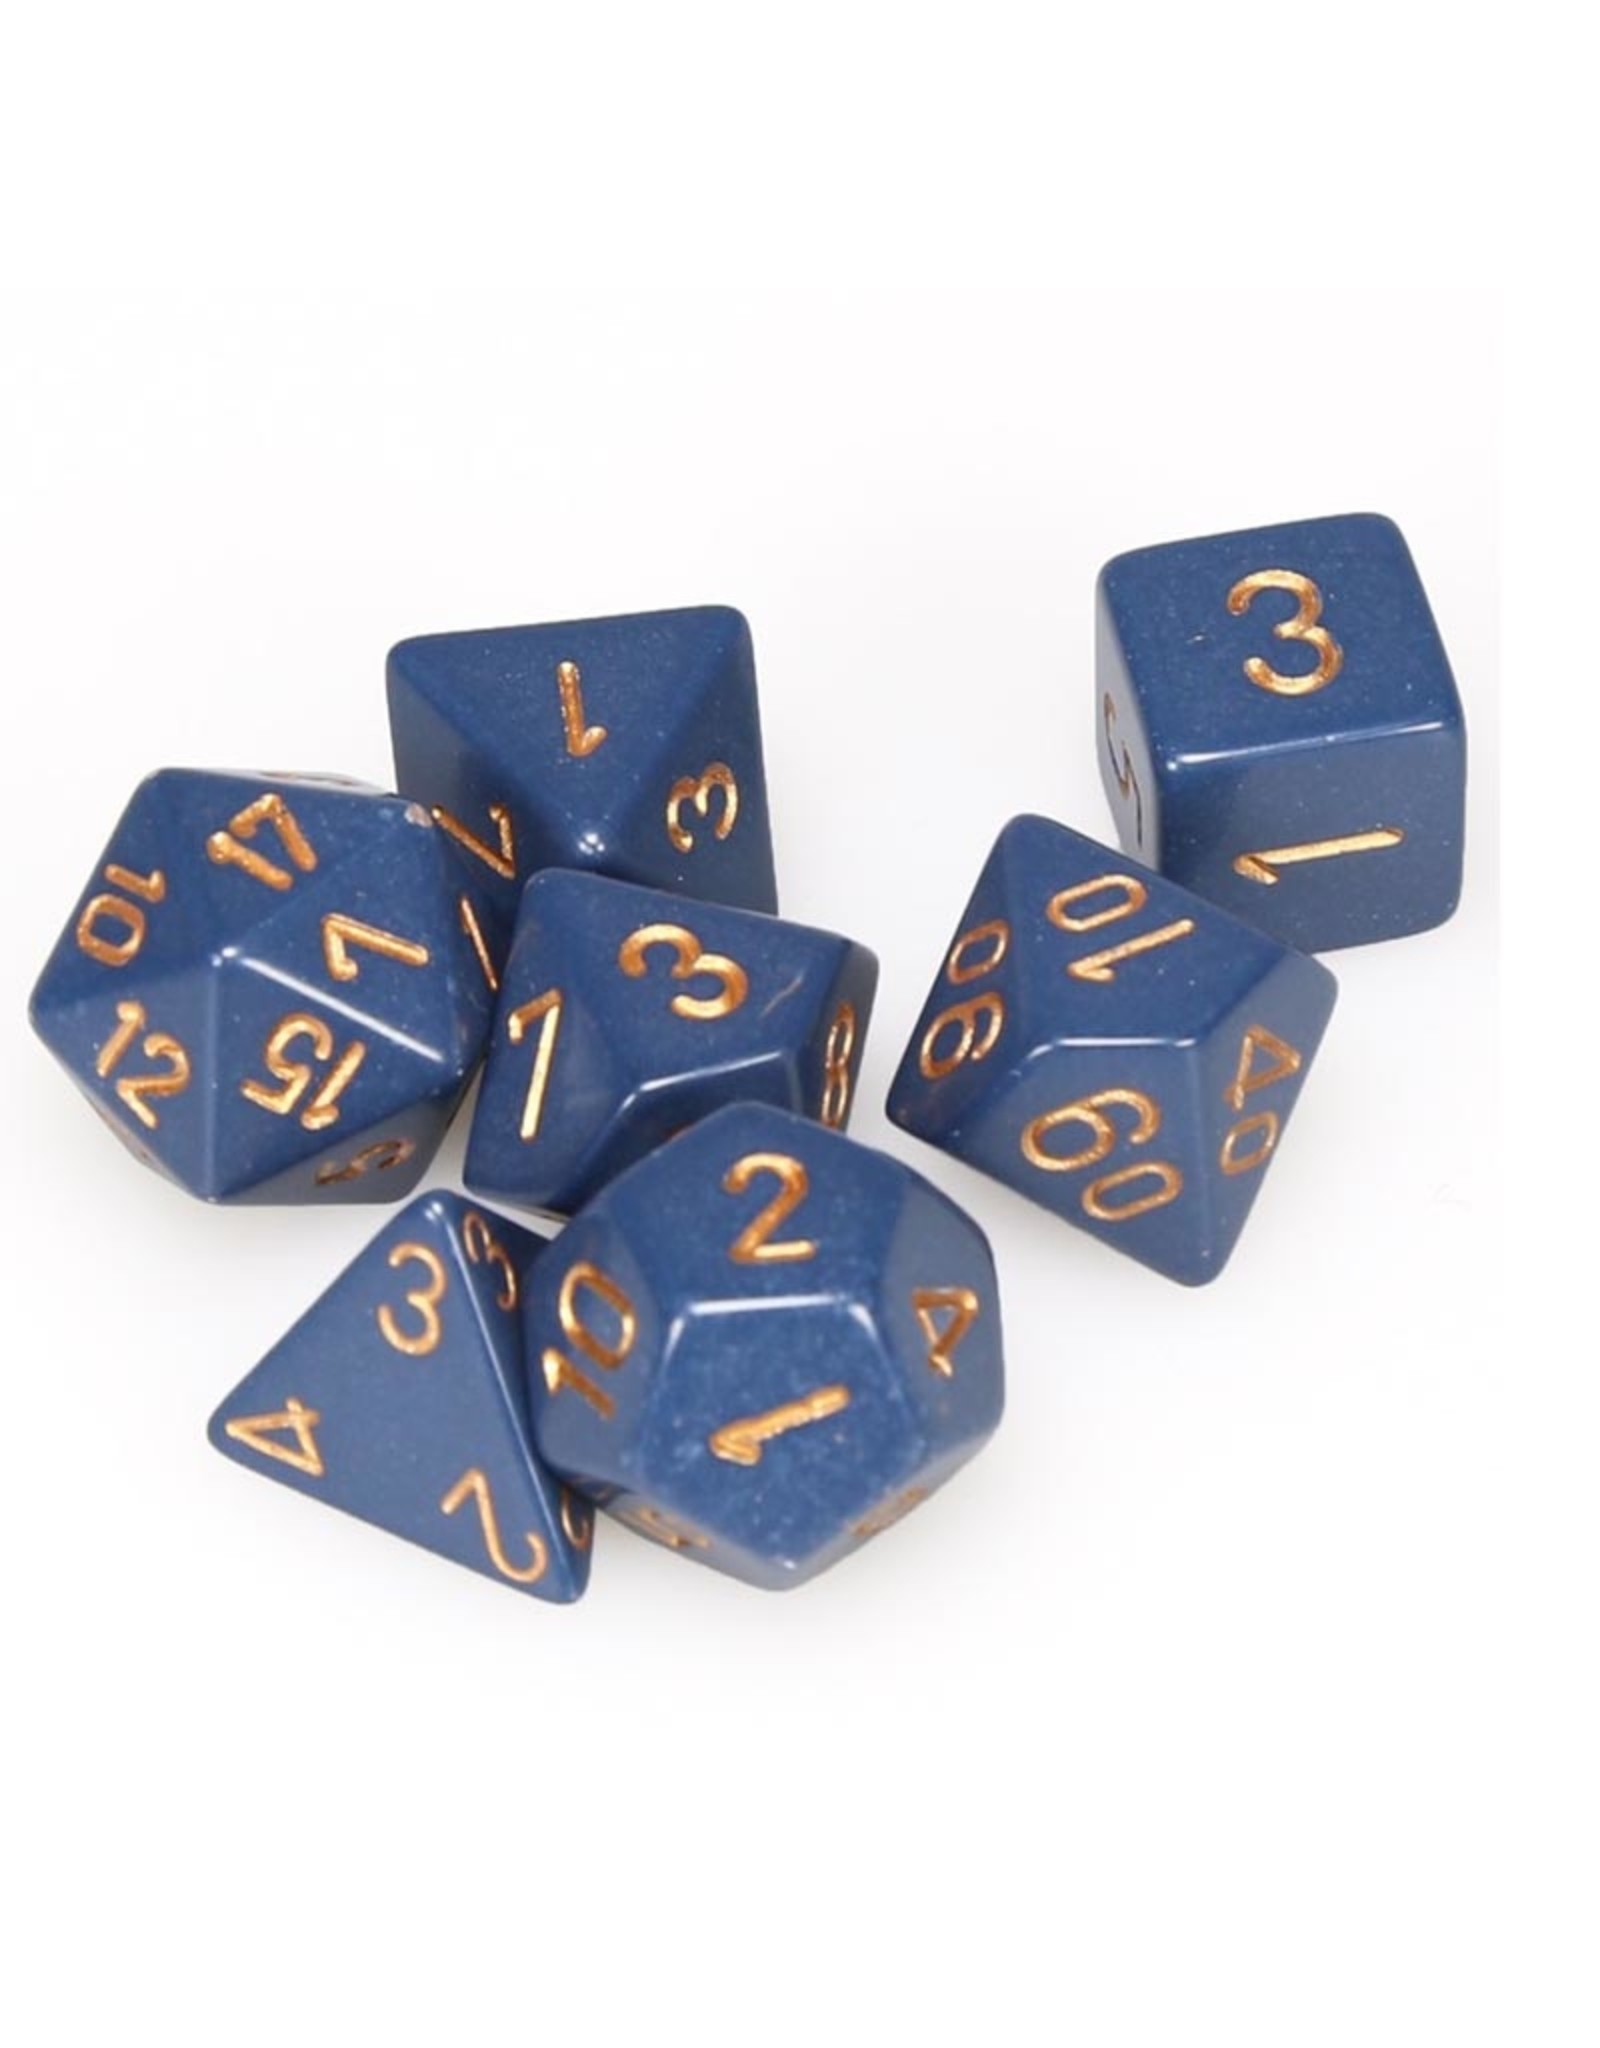 Chessex 7Ct Dice Set CHX25426 Opaque Dusty Blue/Copper